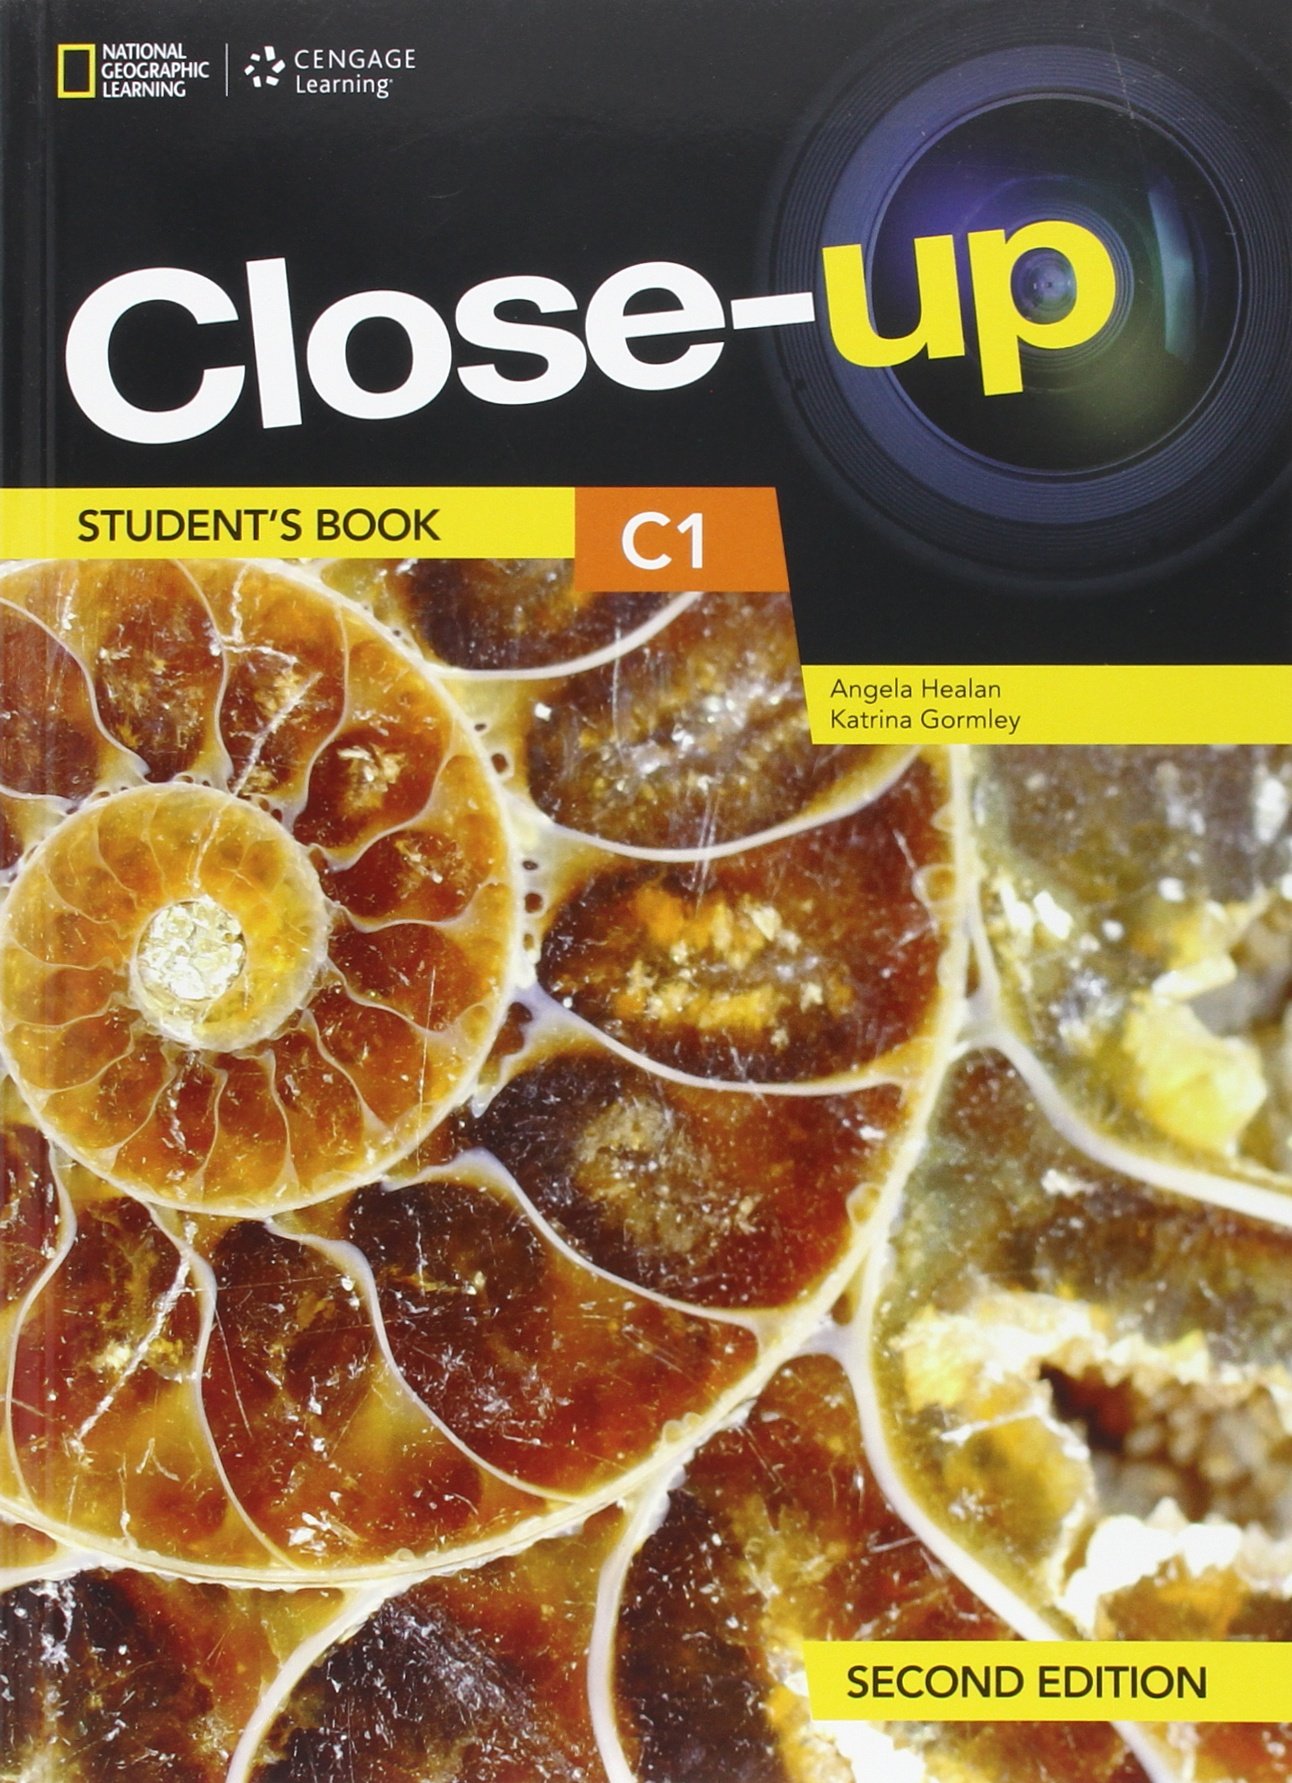 CLOSE-UP 2ND EDITION C1 Student's Book + Online Student Zone + DVD eBook (Flash)